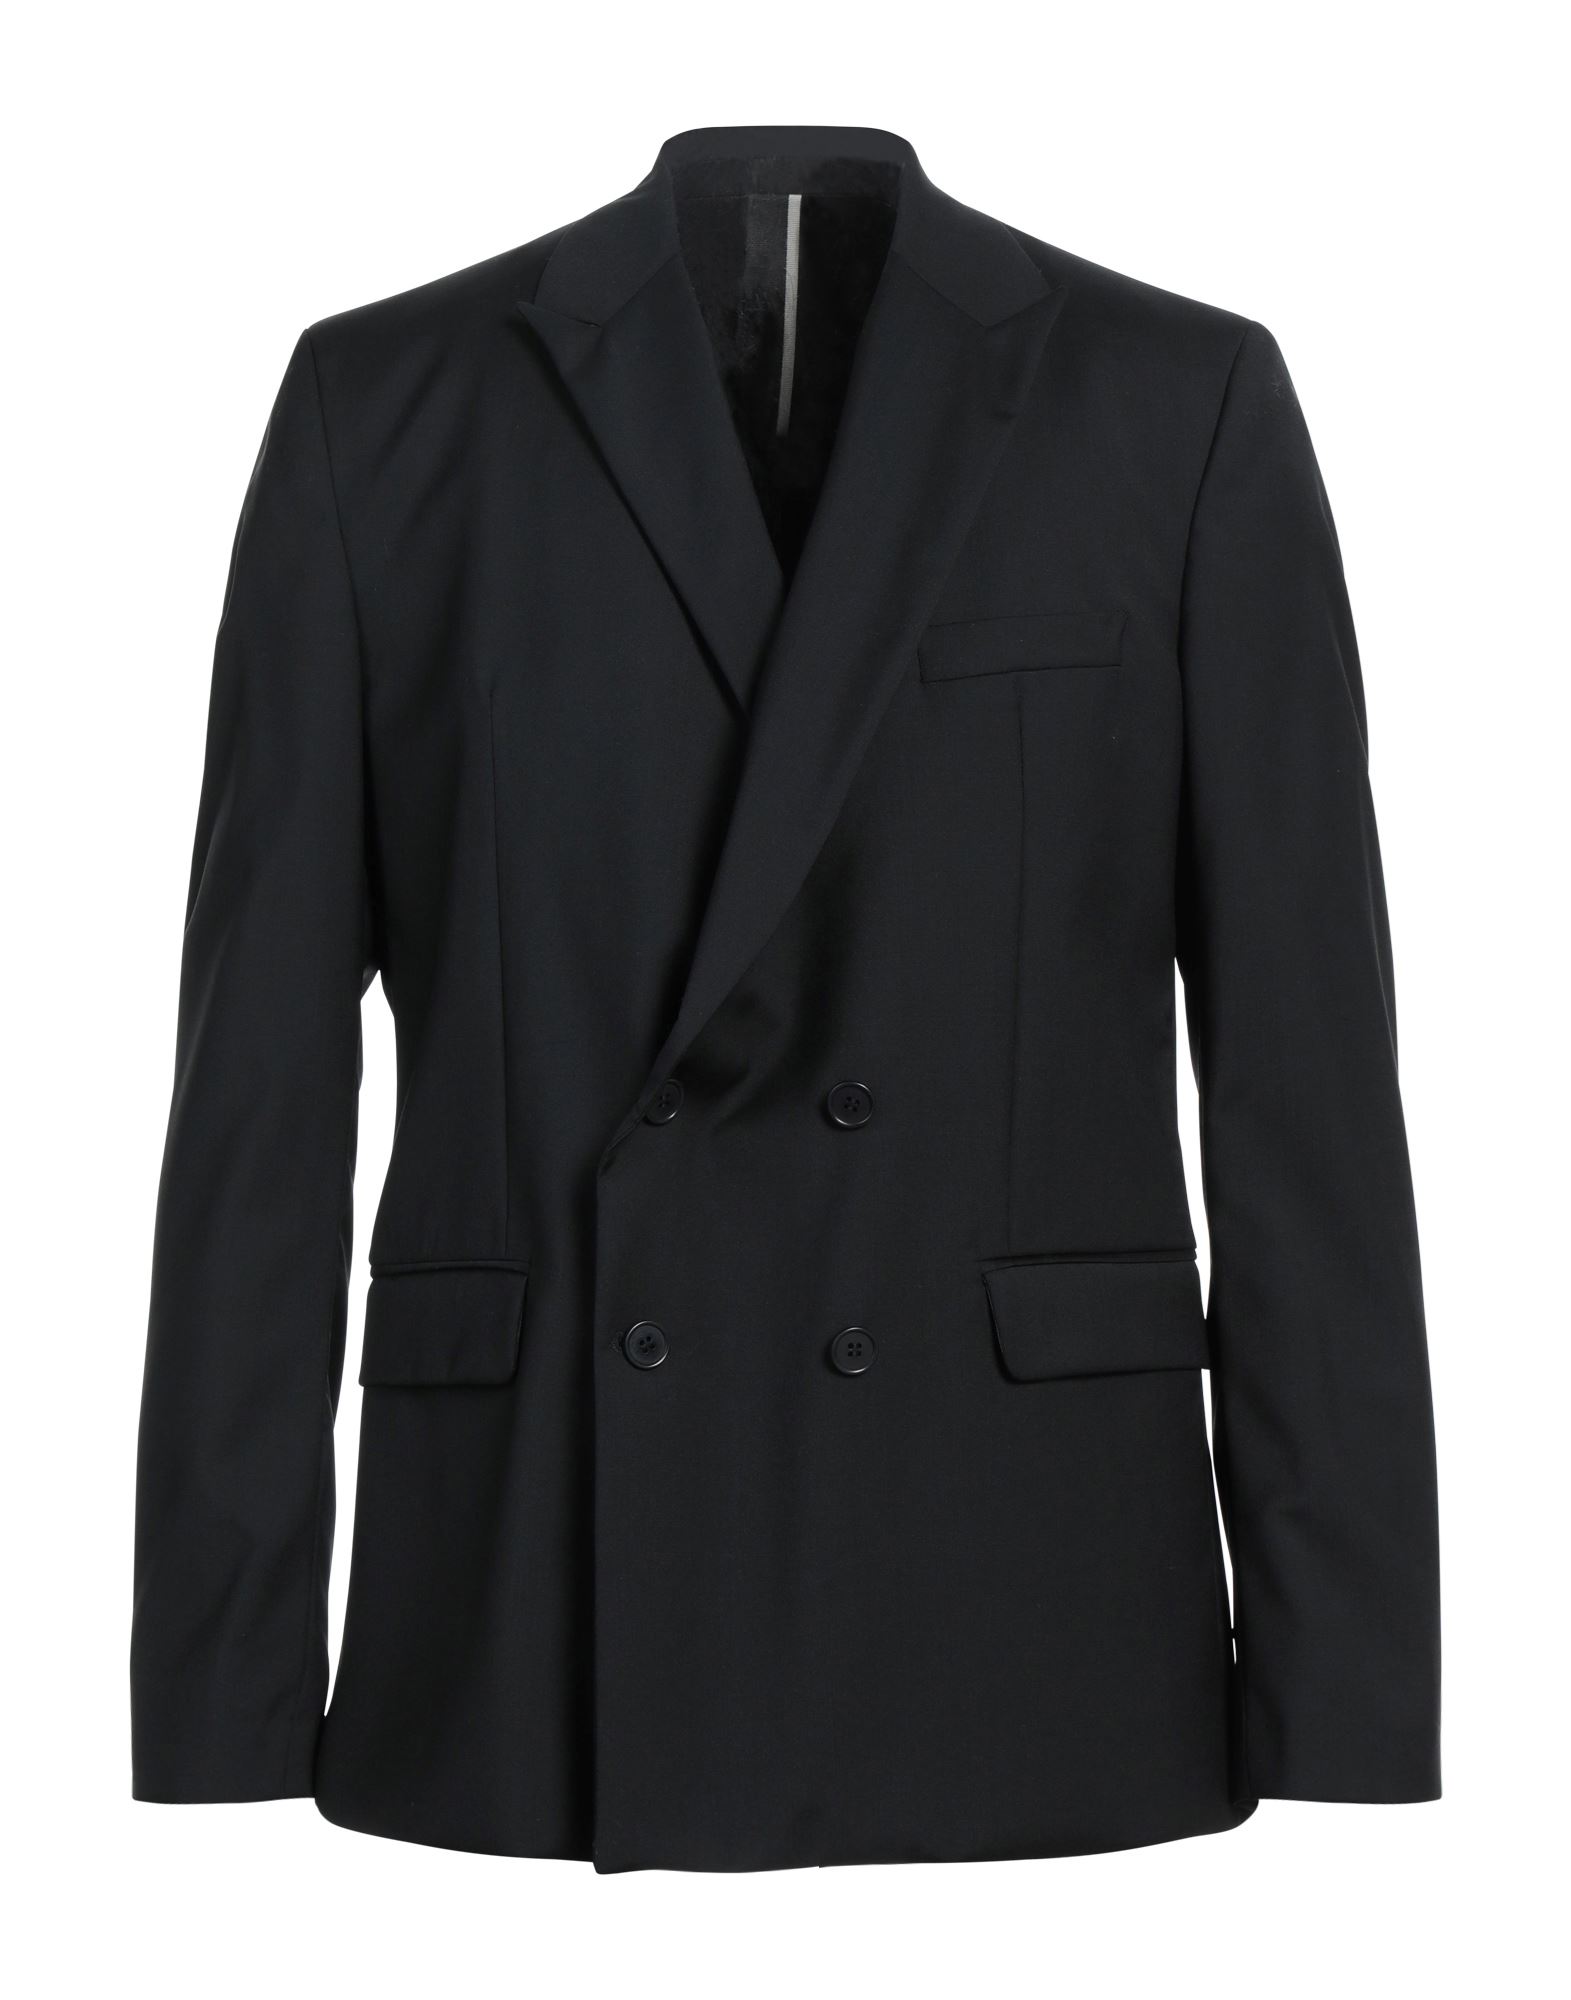 Low Brand Suit Jackets In Black